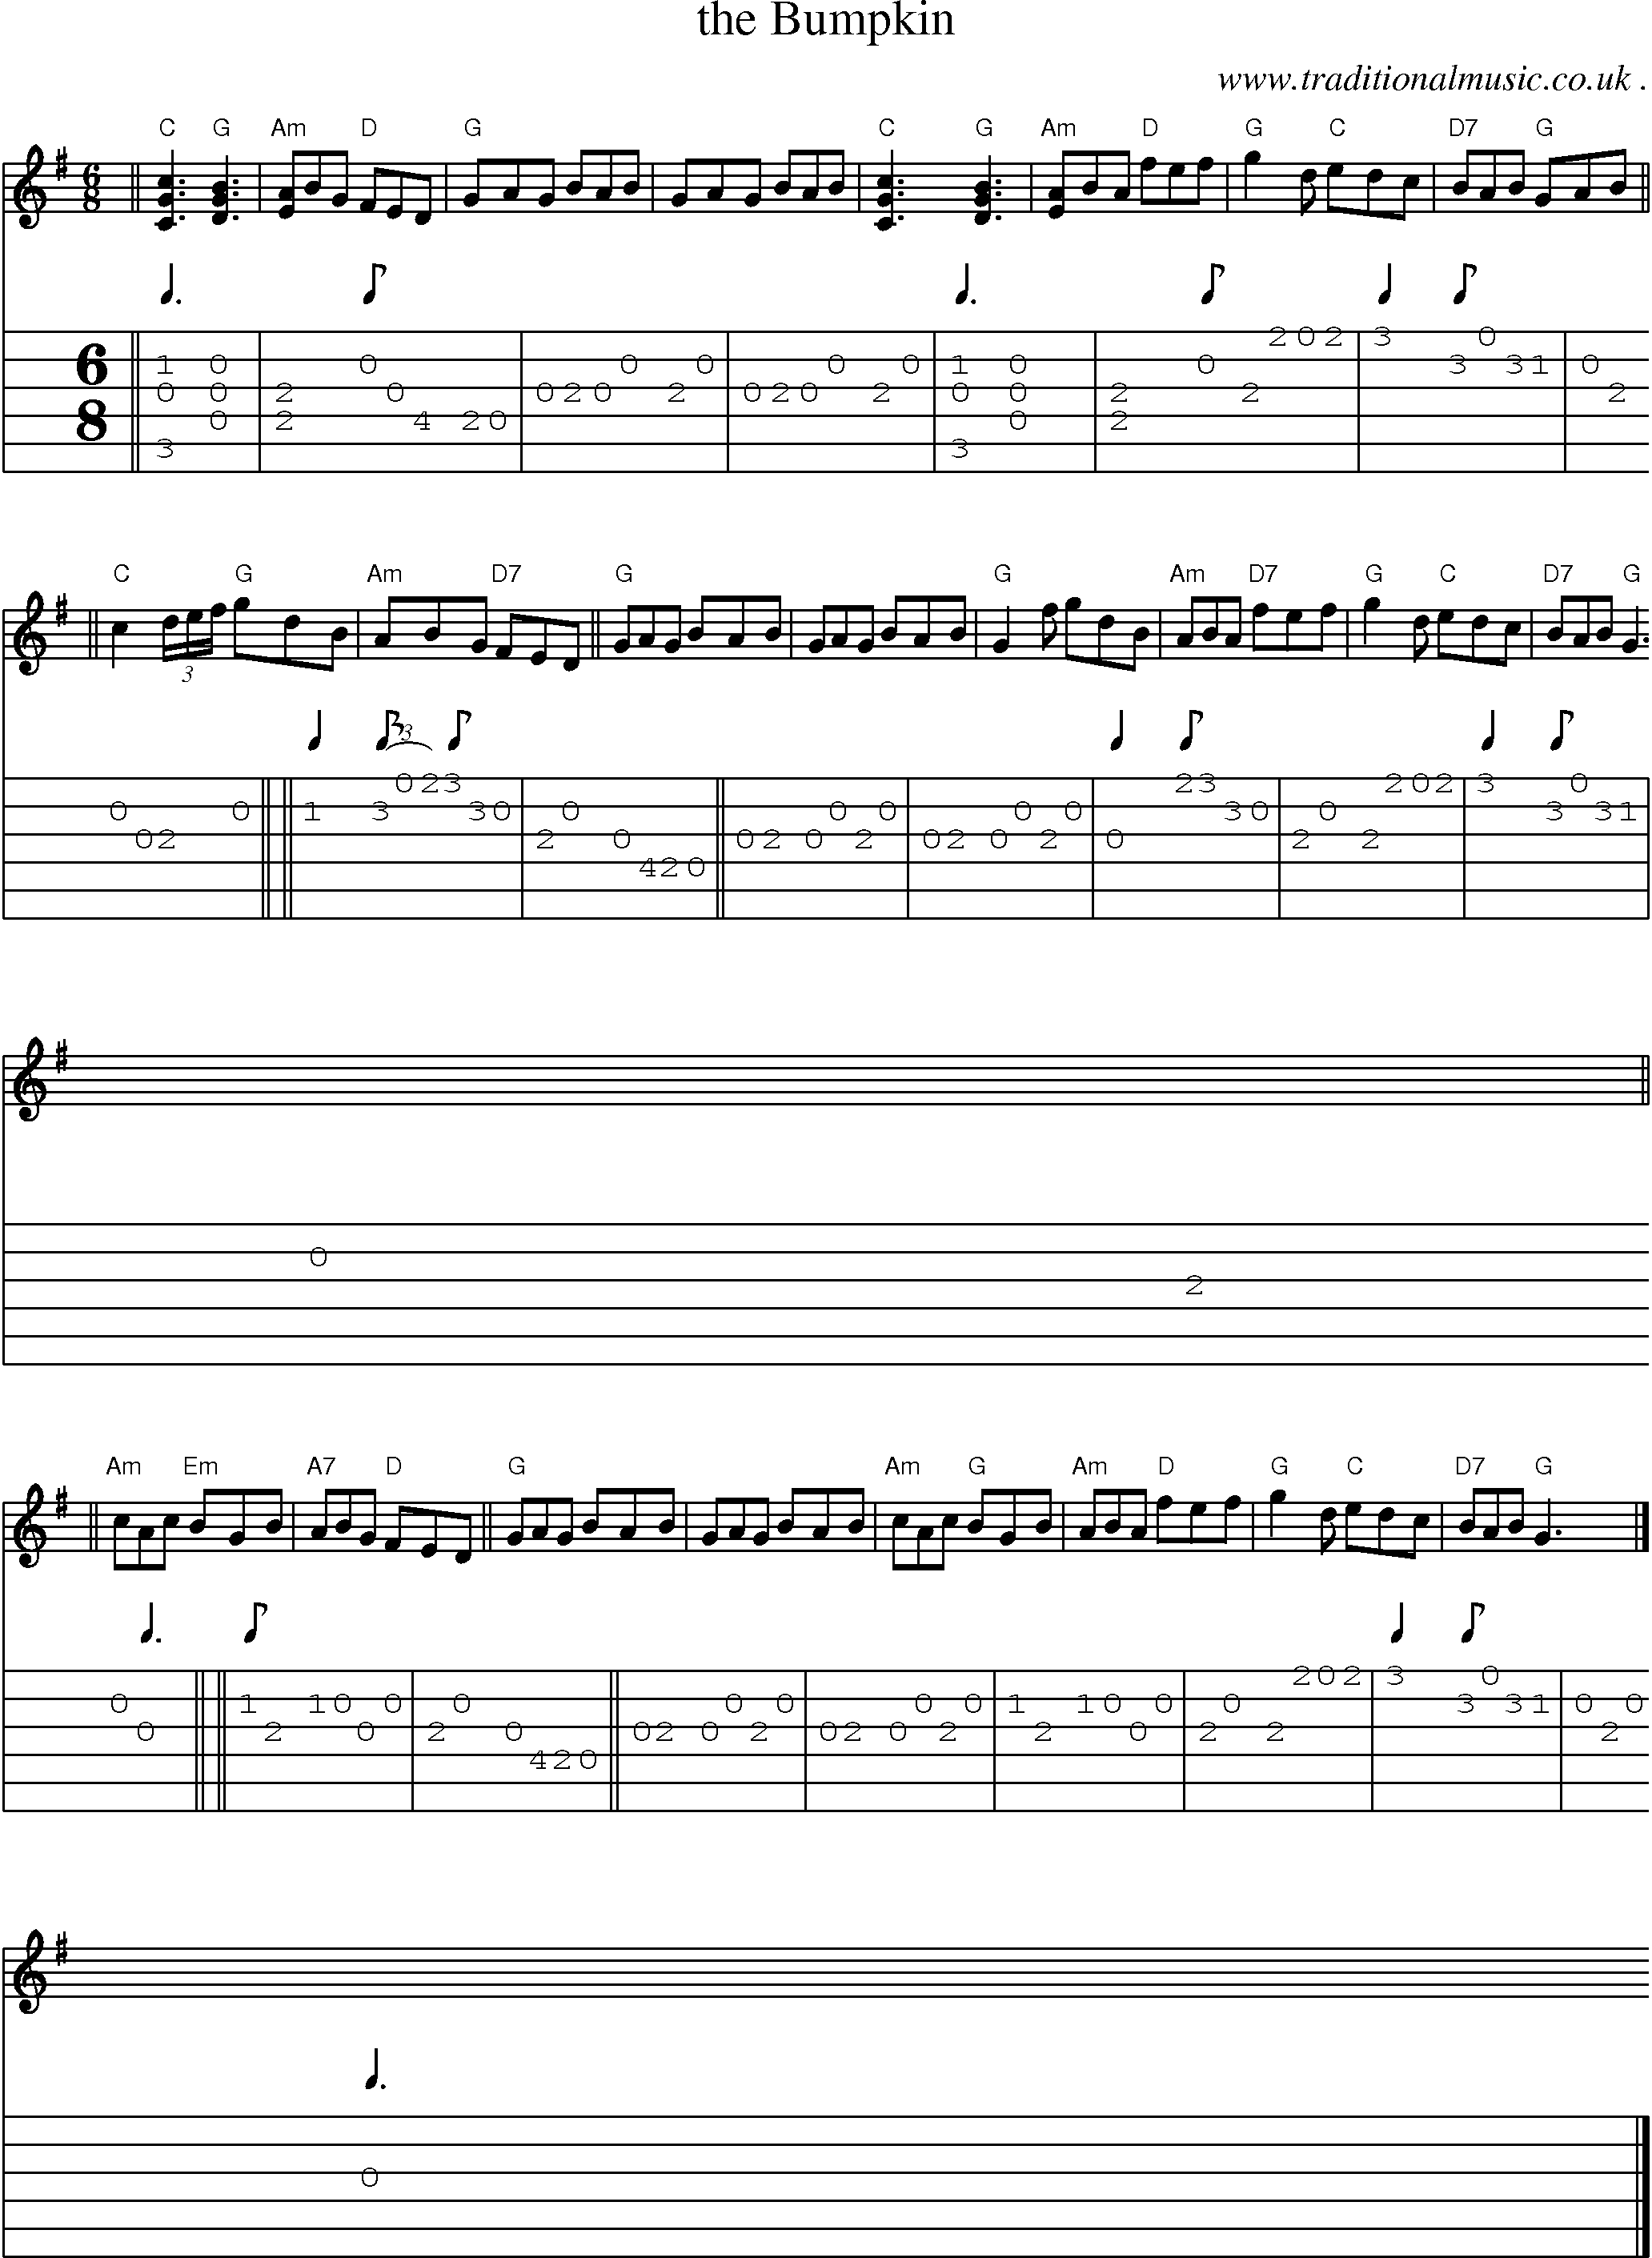 Sheet-music  score, Chords and Guitar Tabs for The Bumpkin